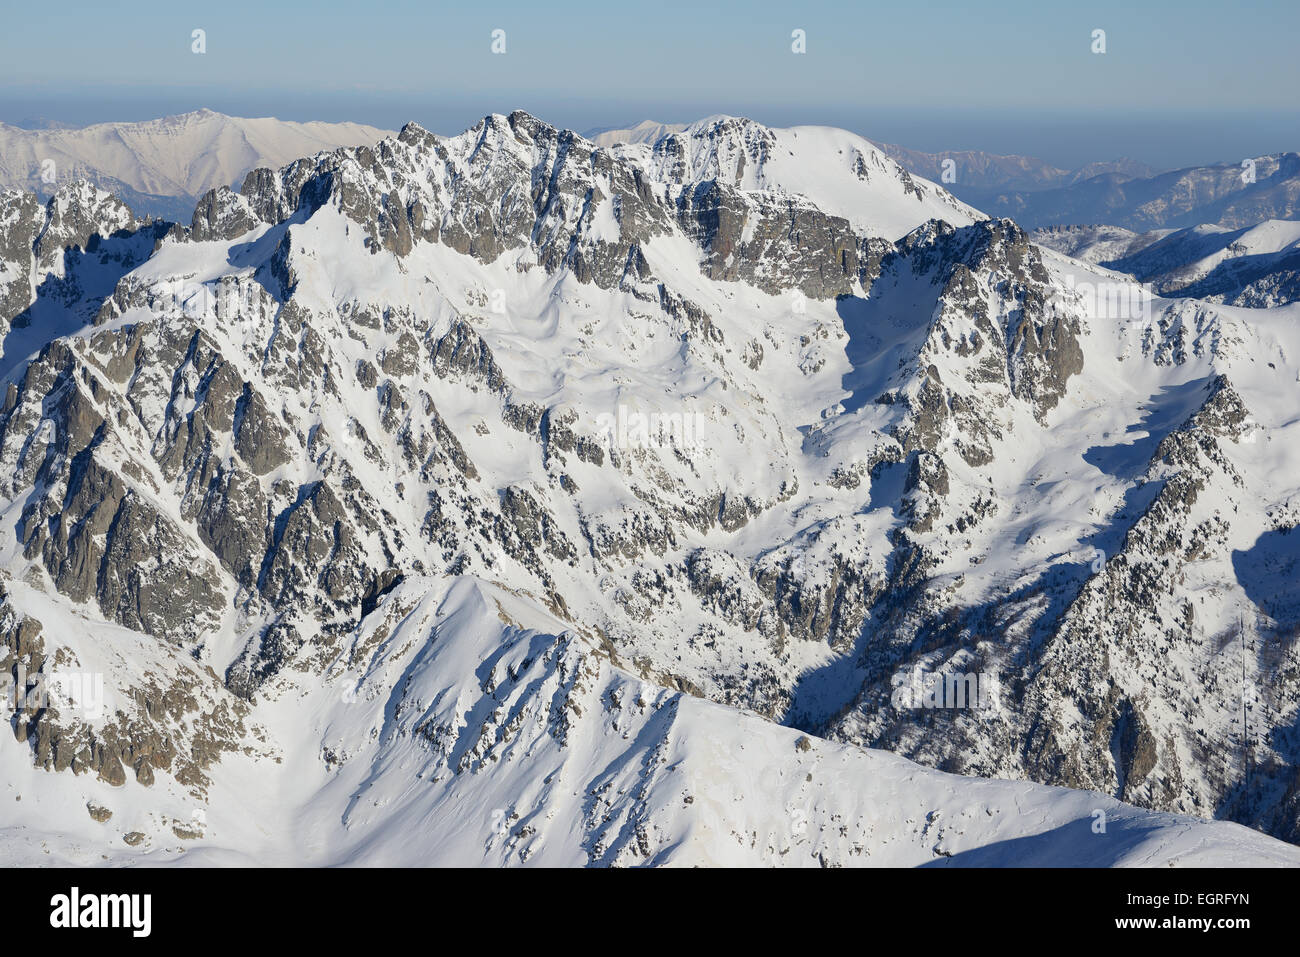 AERIAL VIEW. Mount Grand Capelet, a 2935-meter-high summit in the Mercantour Alps. Belvédère, Gordolasque Valley, Alpes-Maritimes, France. Stock Photo